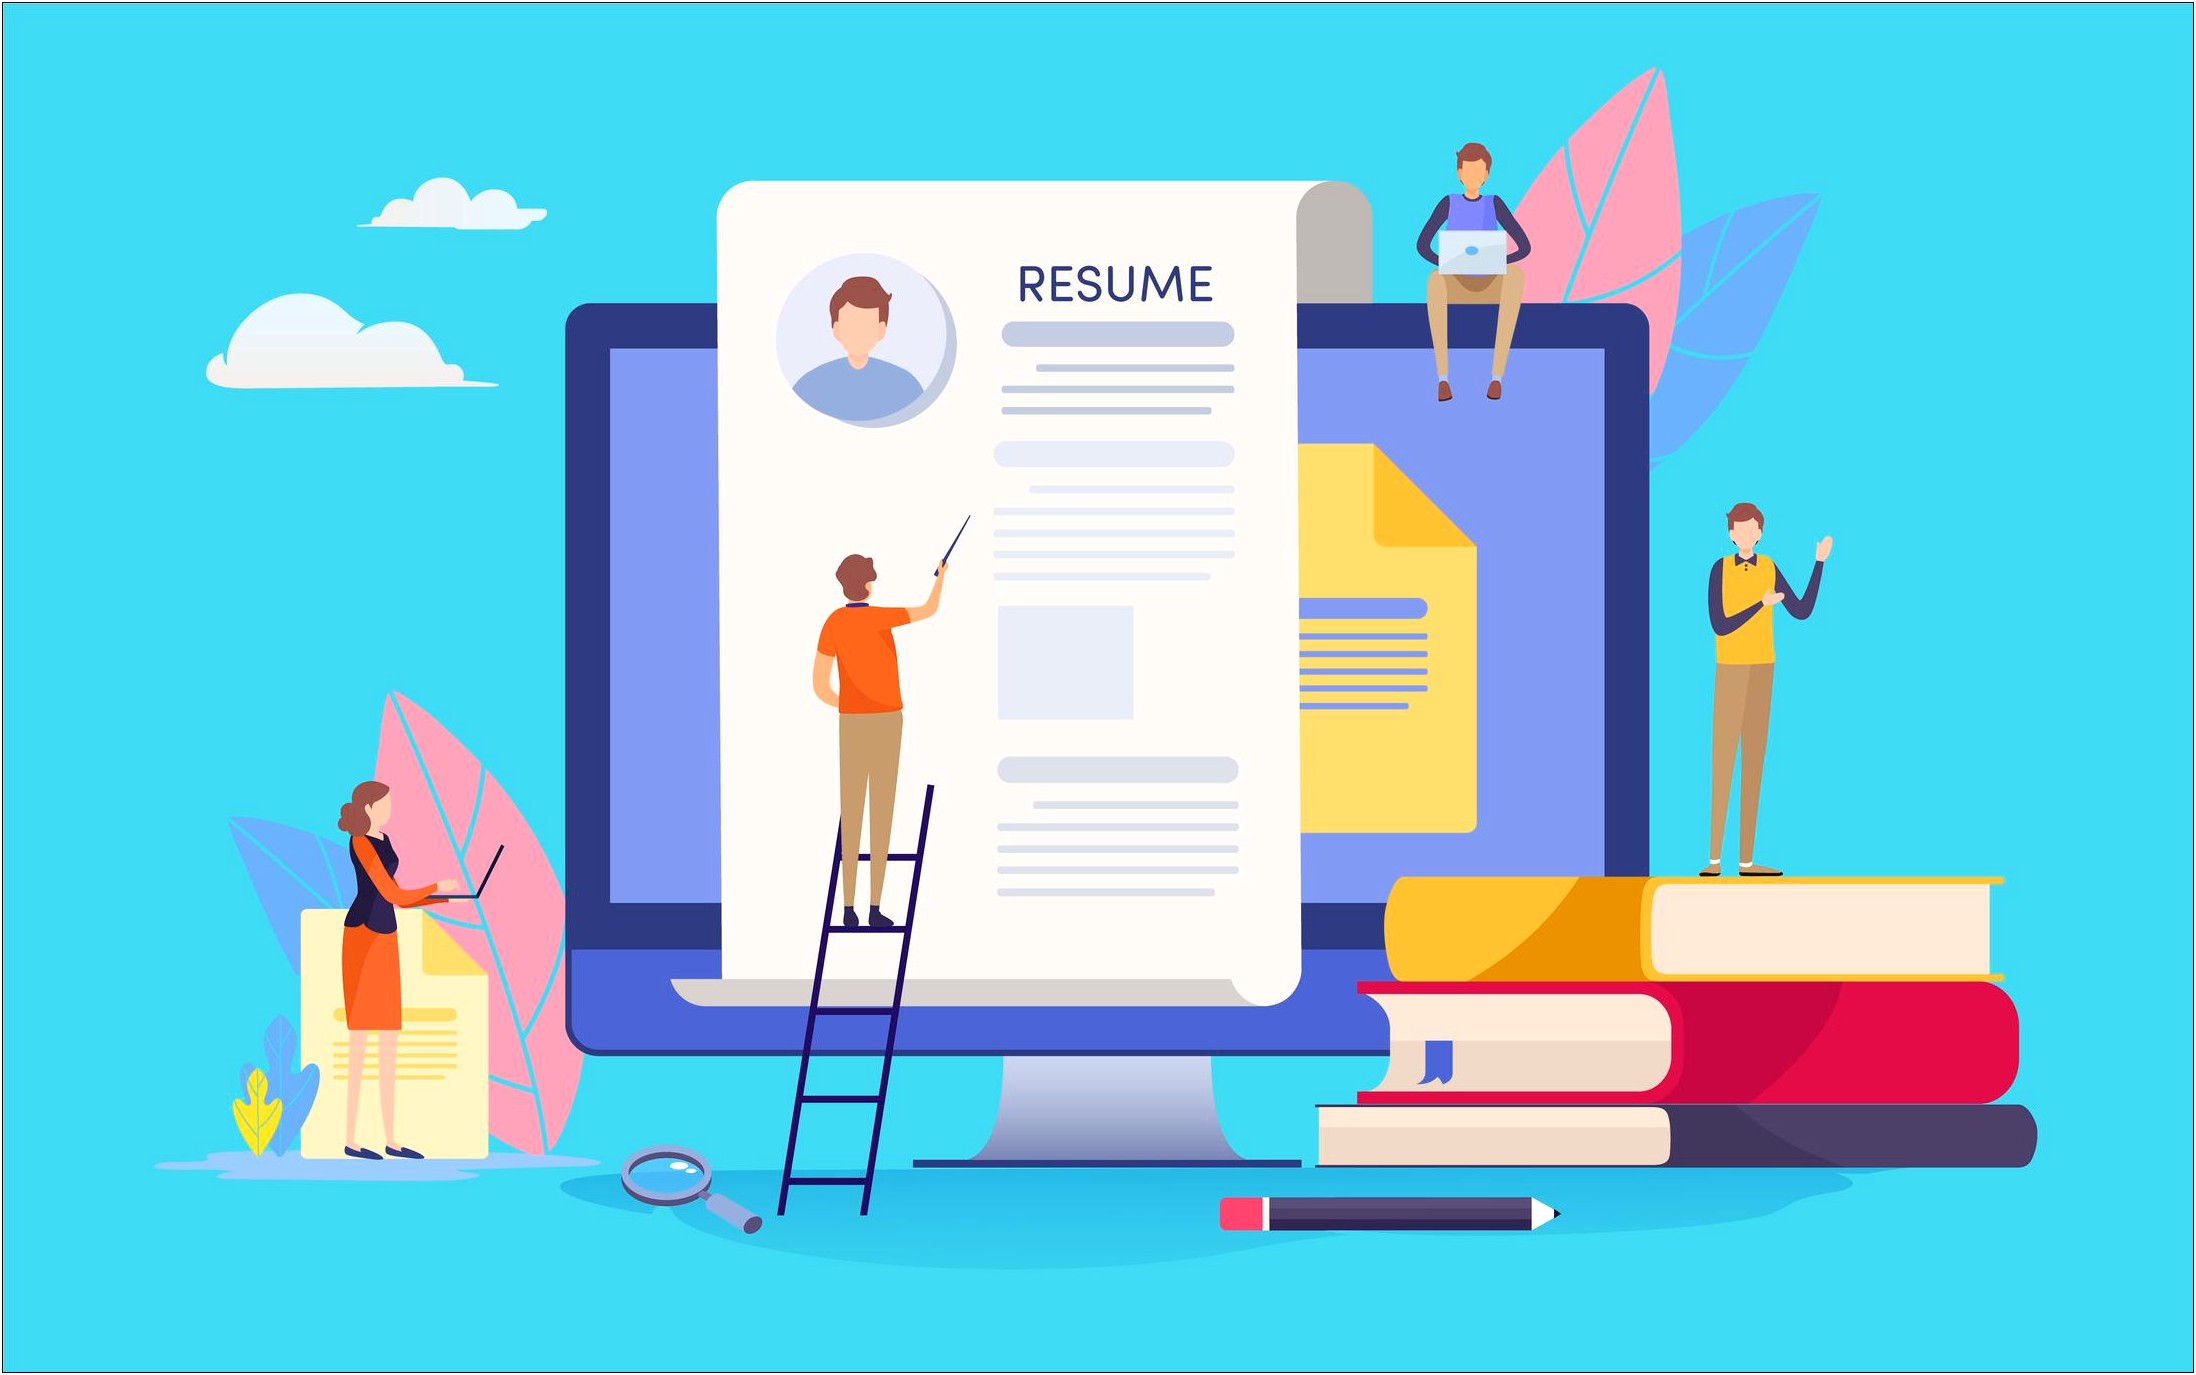 The Best Length For A Resume Is